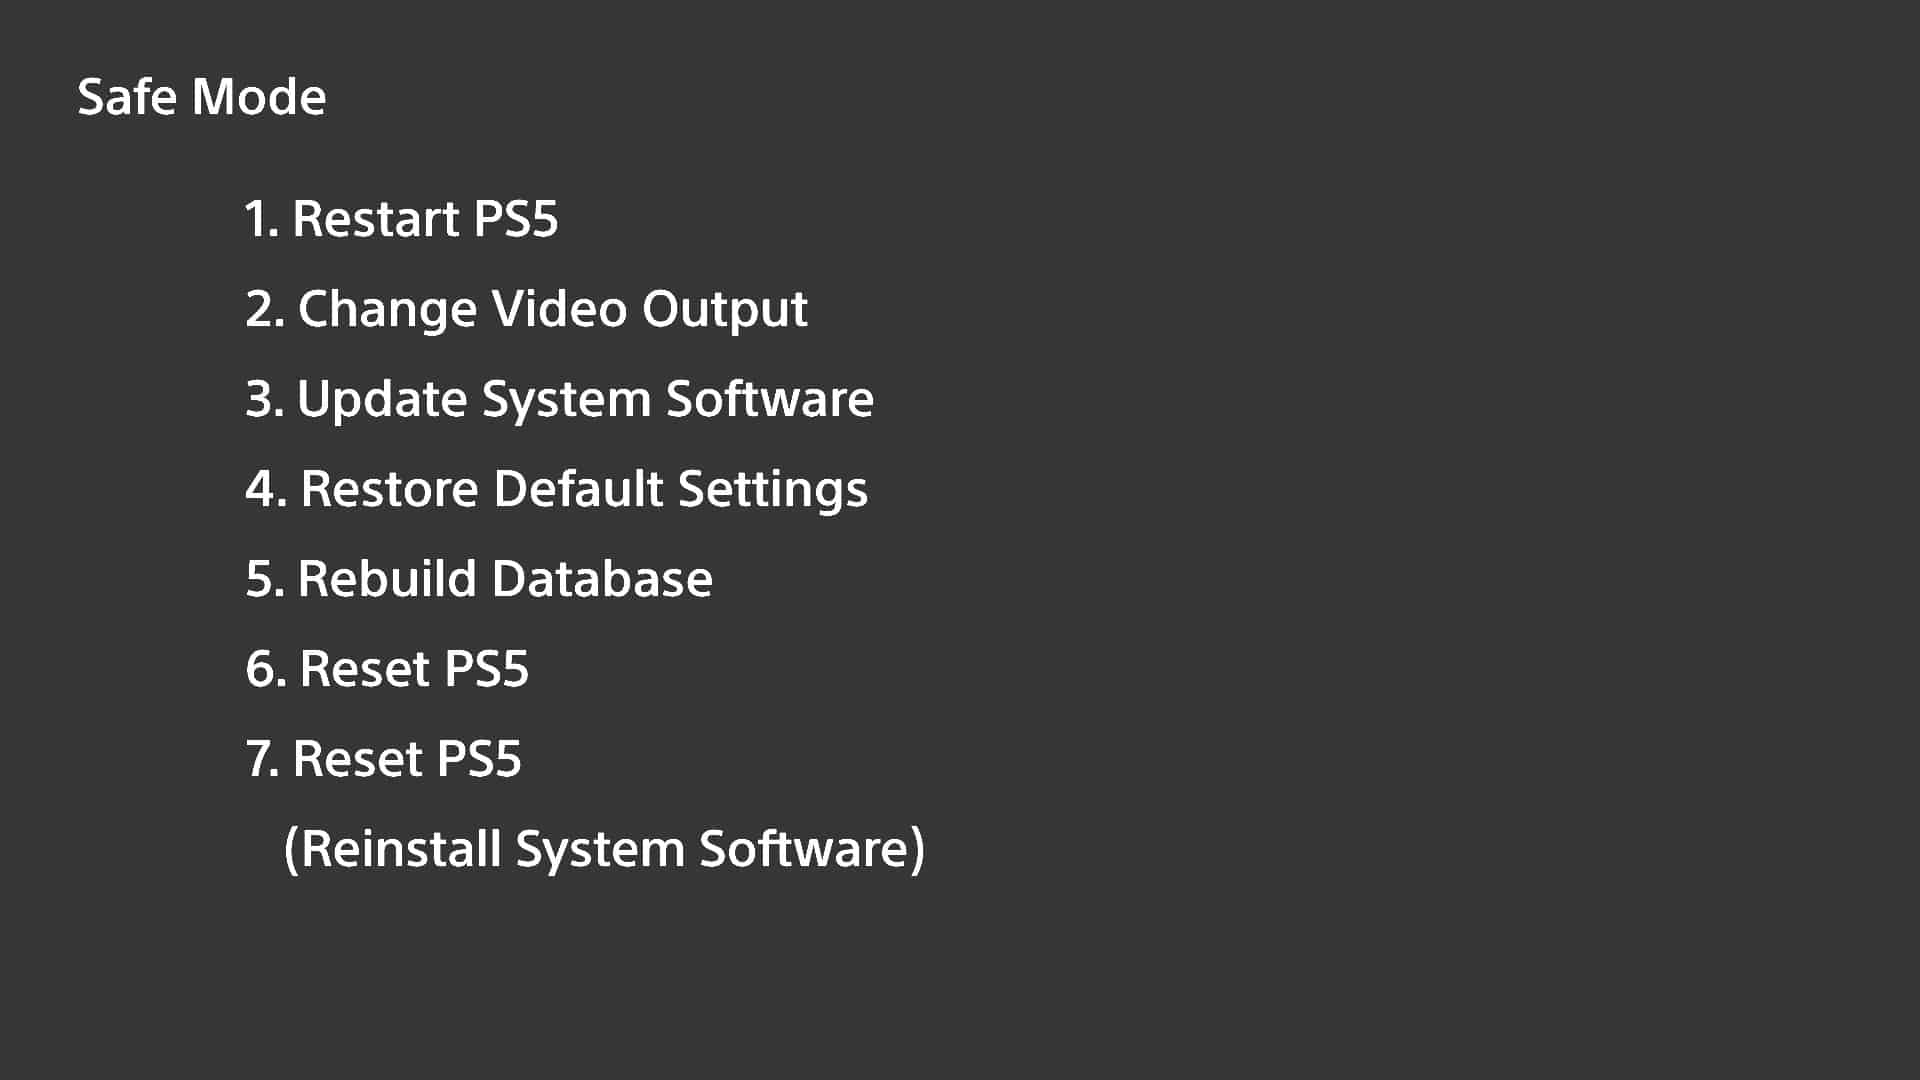 ps5 change video output in safe mode